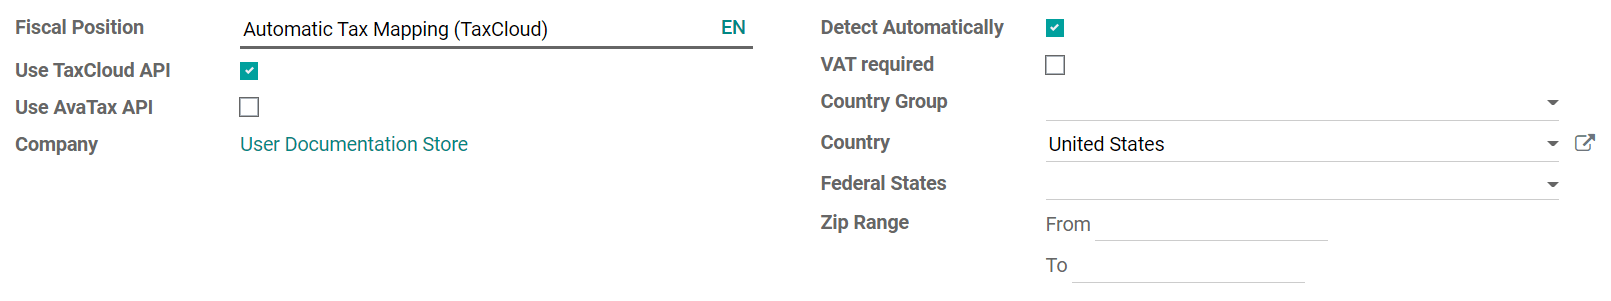 Detect Automatically setting on the TaxCloud fiscal position